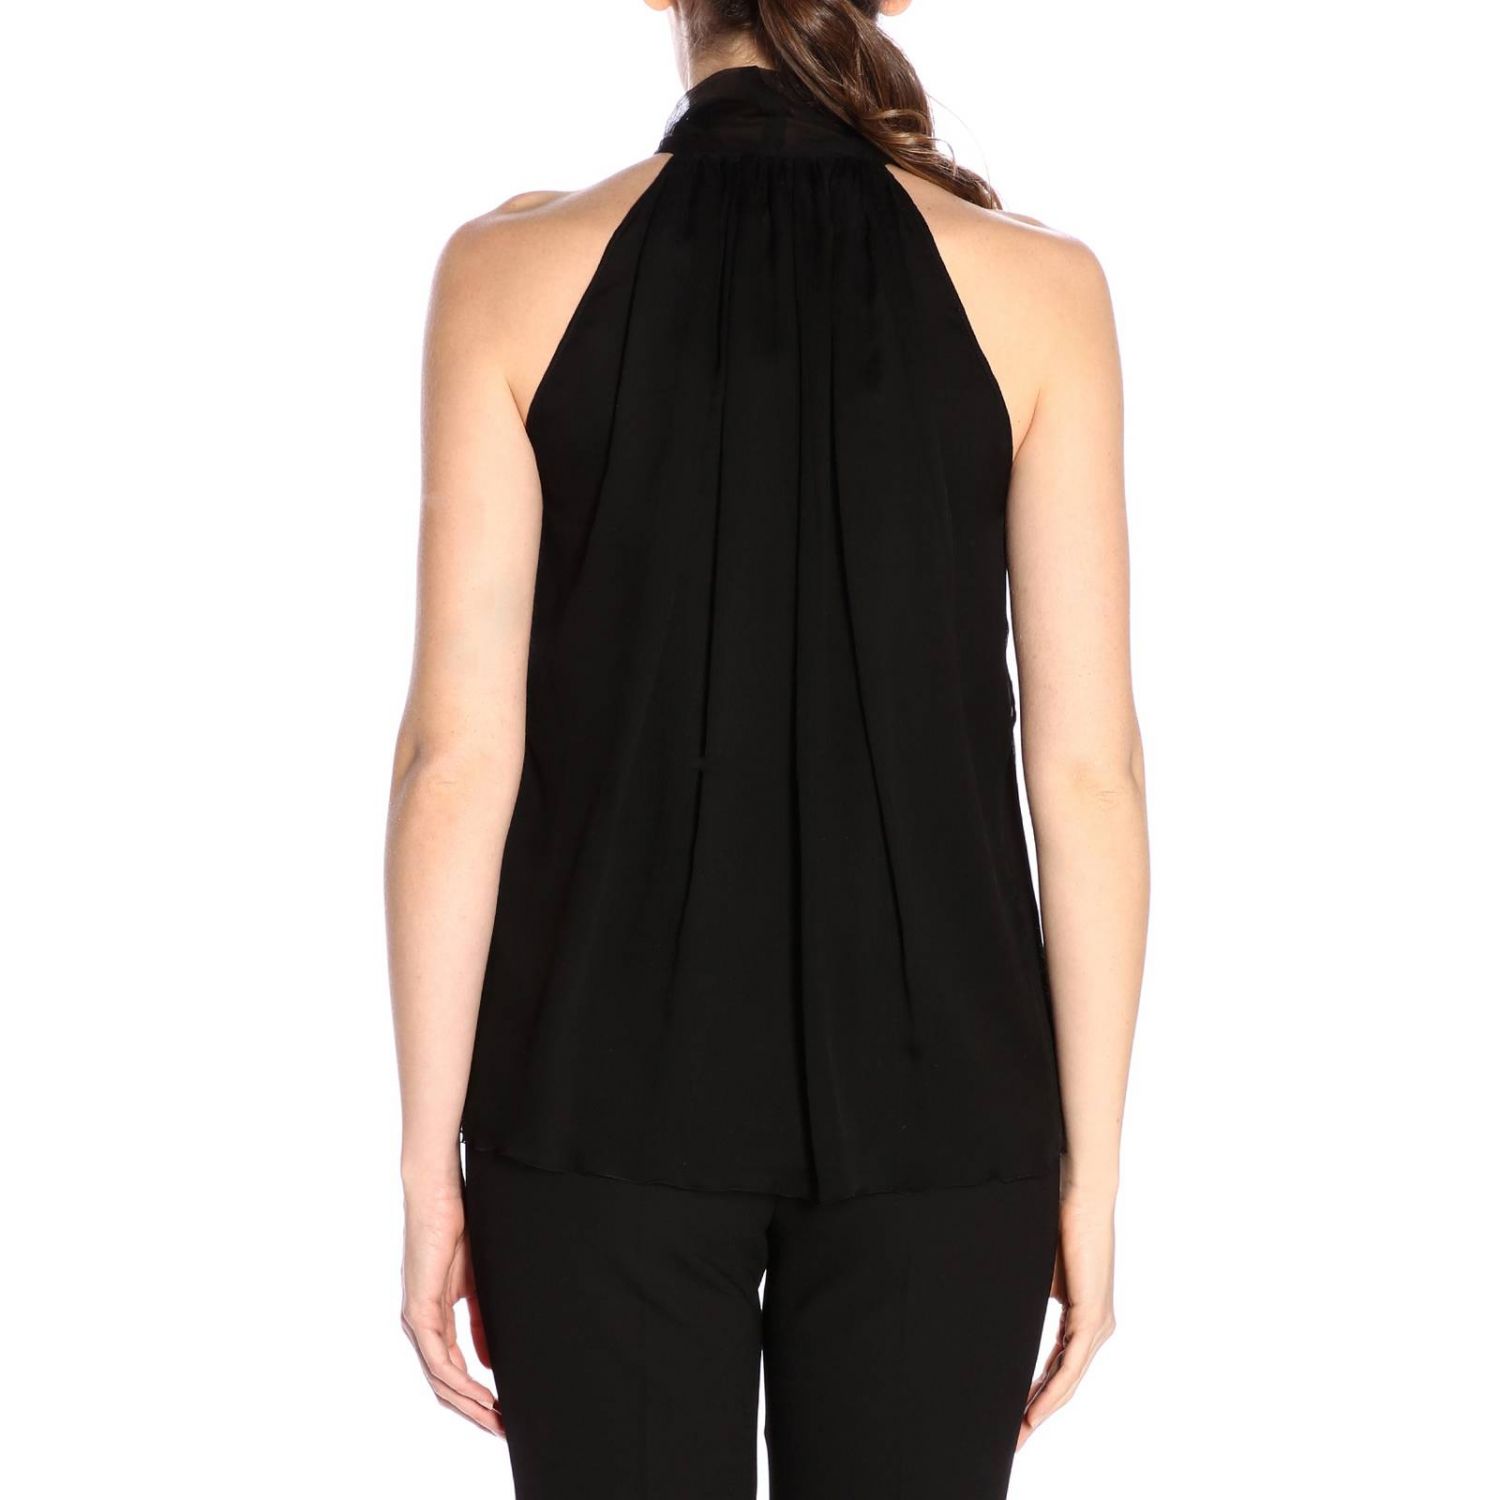 Blumarine Outlet: top for woman - Black | Blumarine top 3411 online on ...